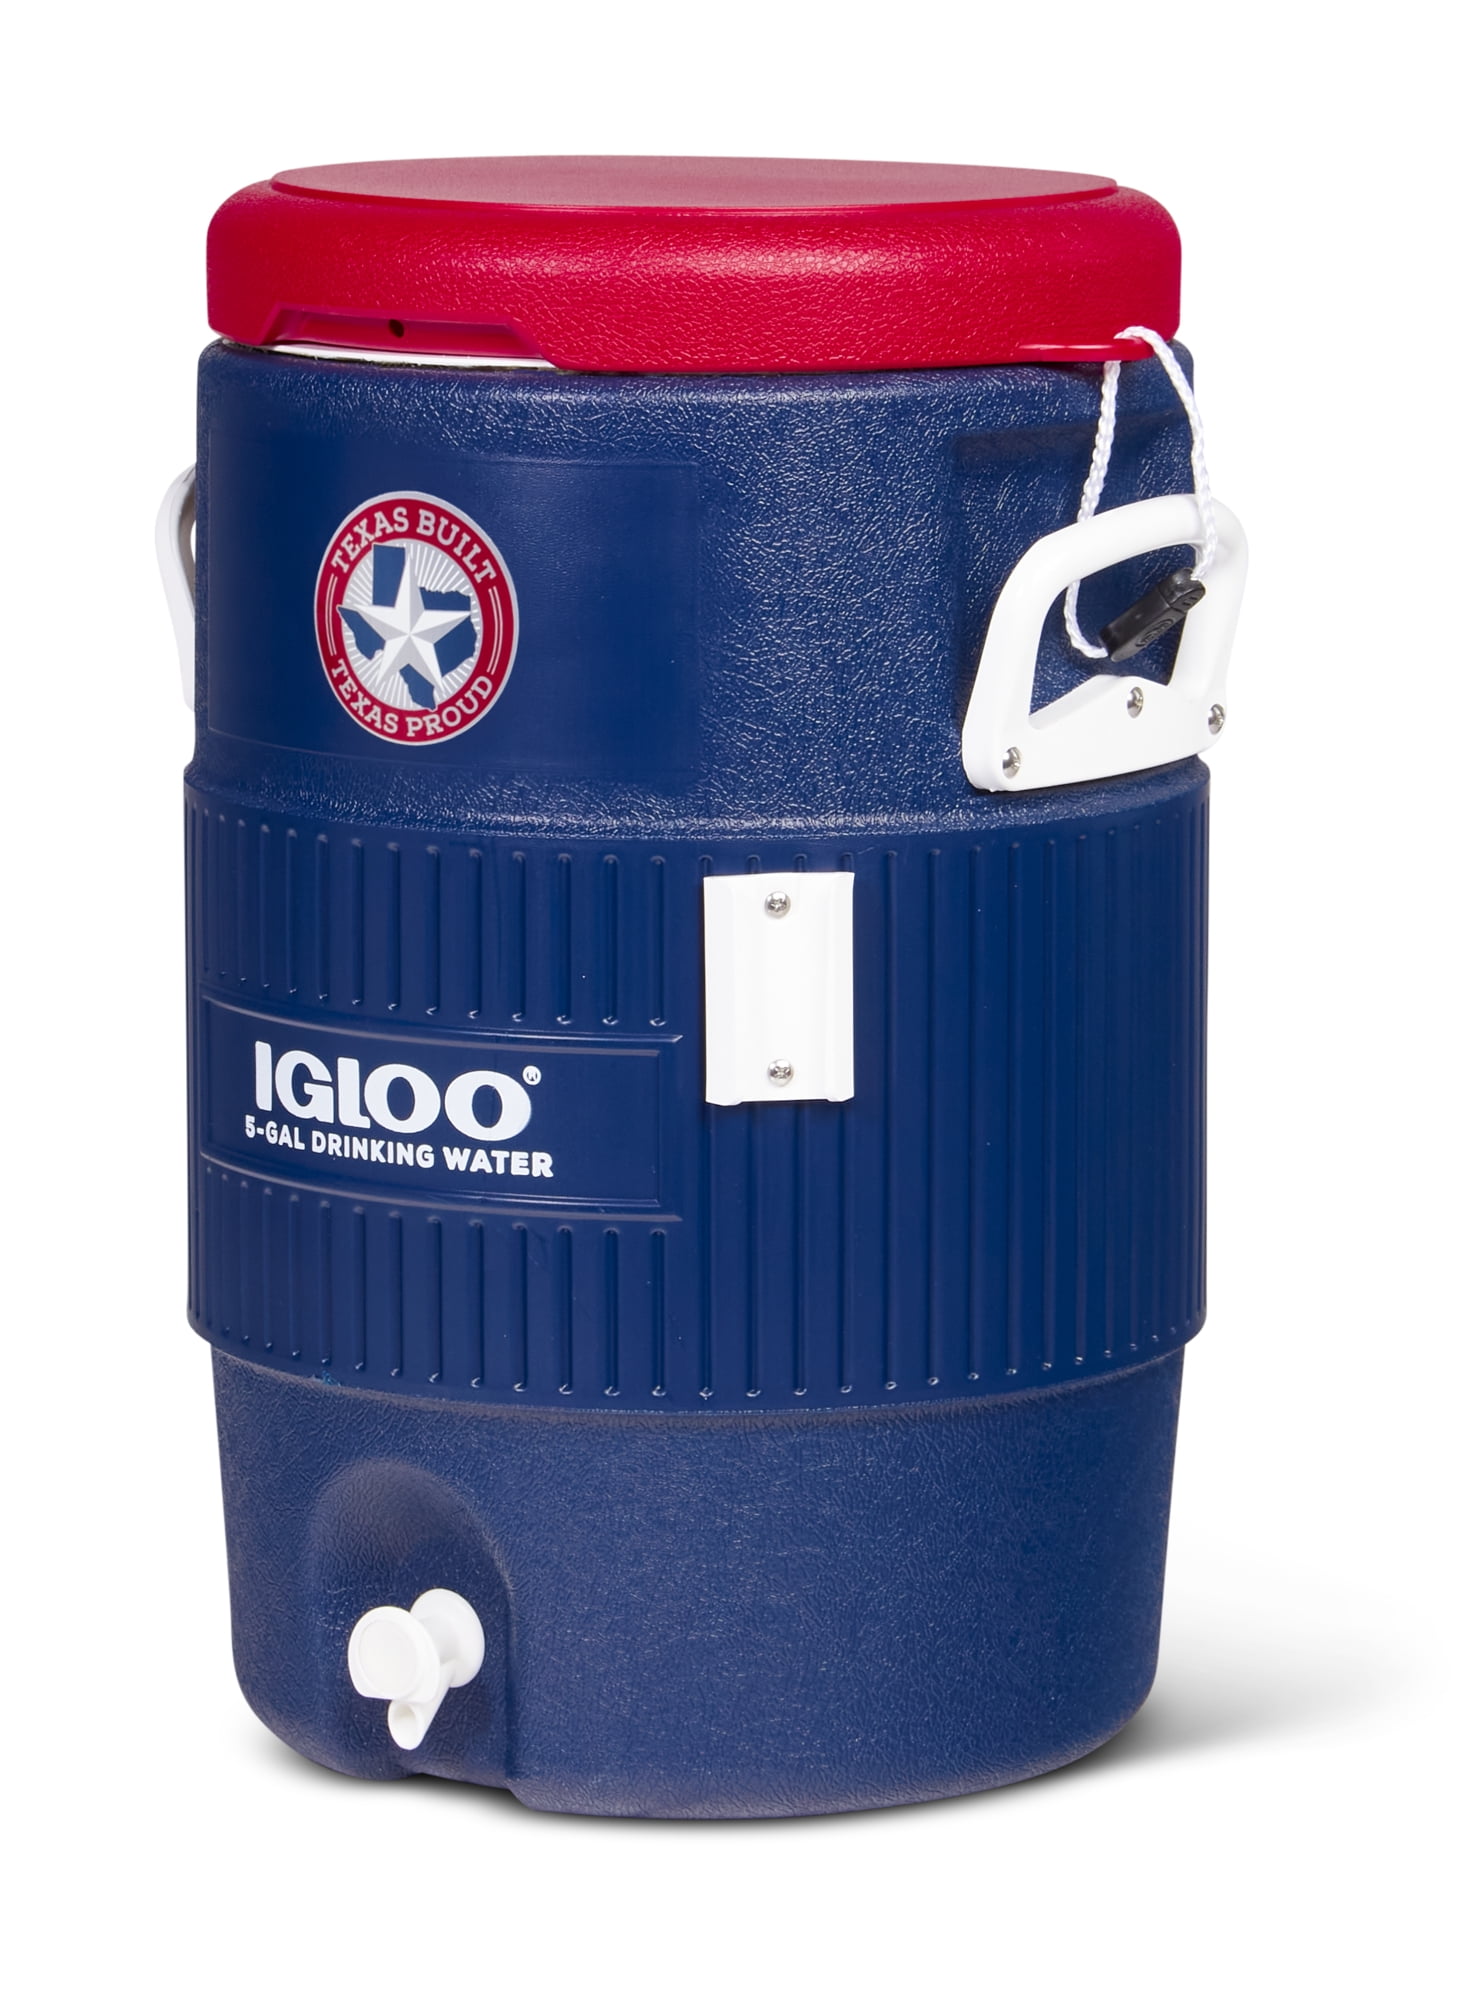 Igloo 5-Gallon Heavy Duty Beverage Sports Outdoor Water Cooler Insulated NEW 